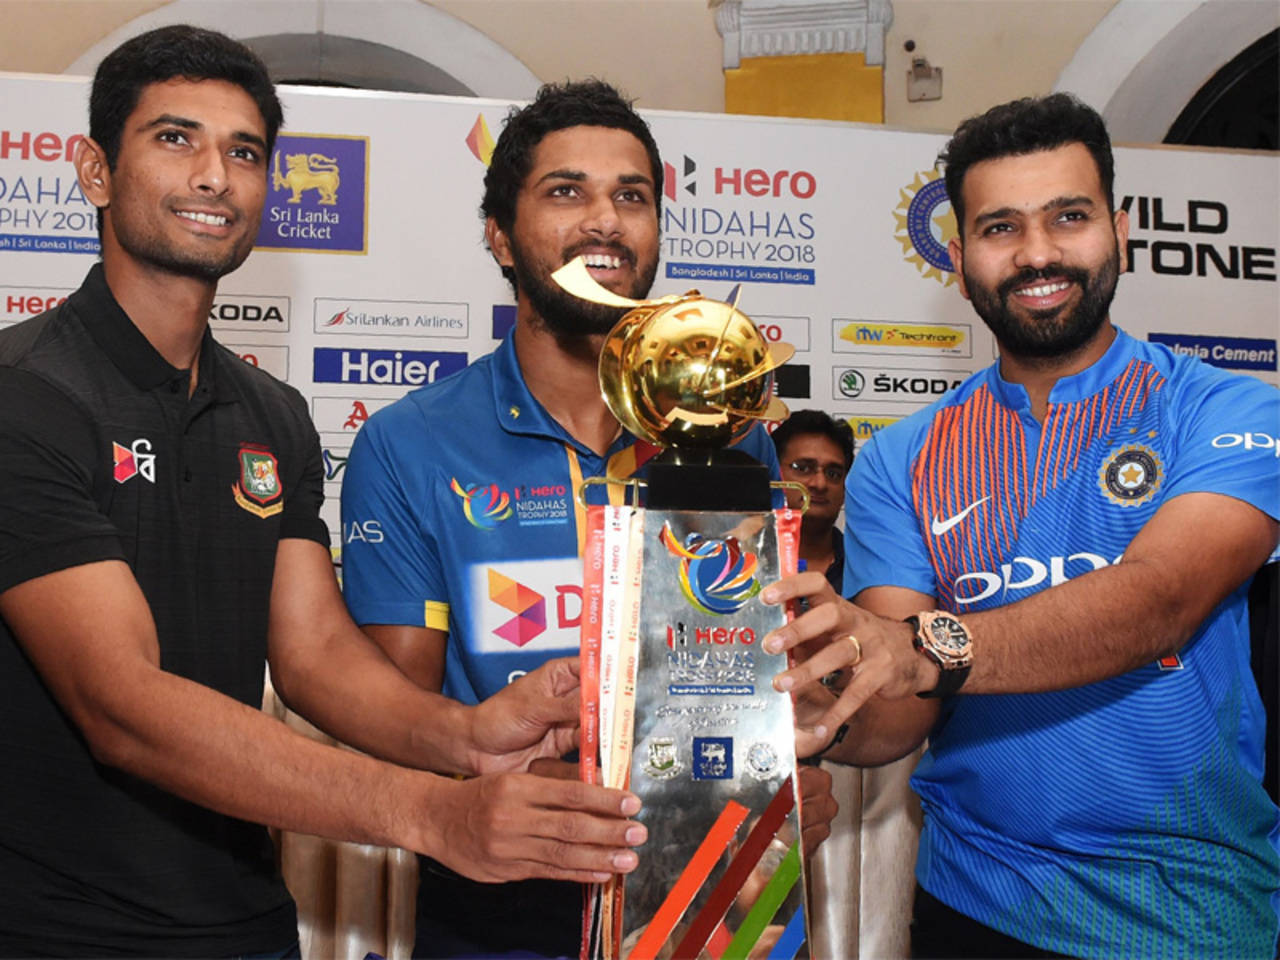 When, where, how to watch and follow the live streaming of India vs Sri Lanka, 1st T20, Nidahas Trophy 2018 Cricket News